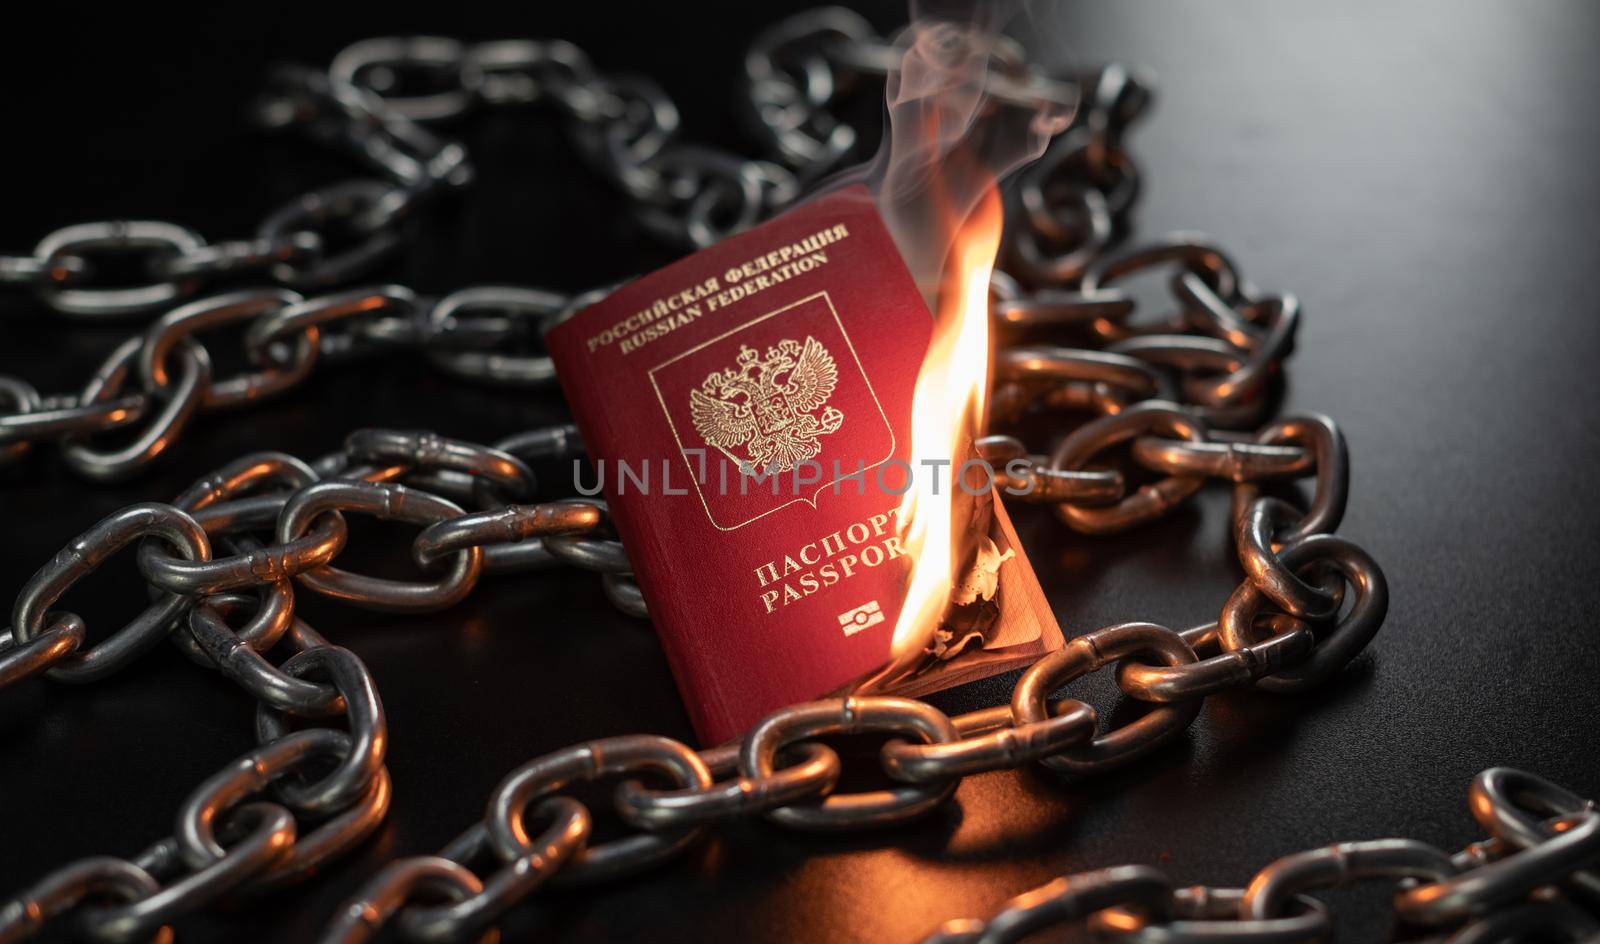 Russian passport is on fire against the background of a metal chain by Rotozey